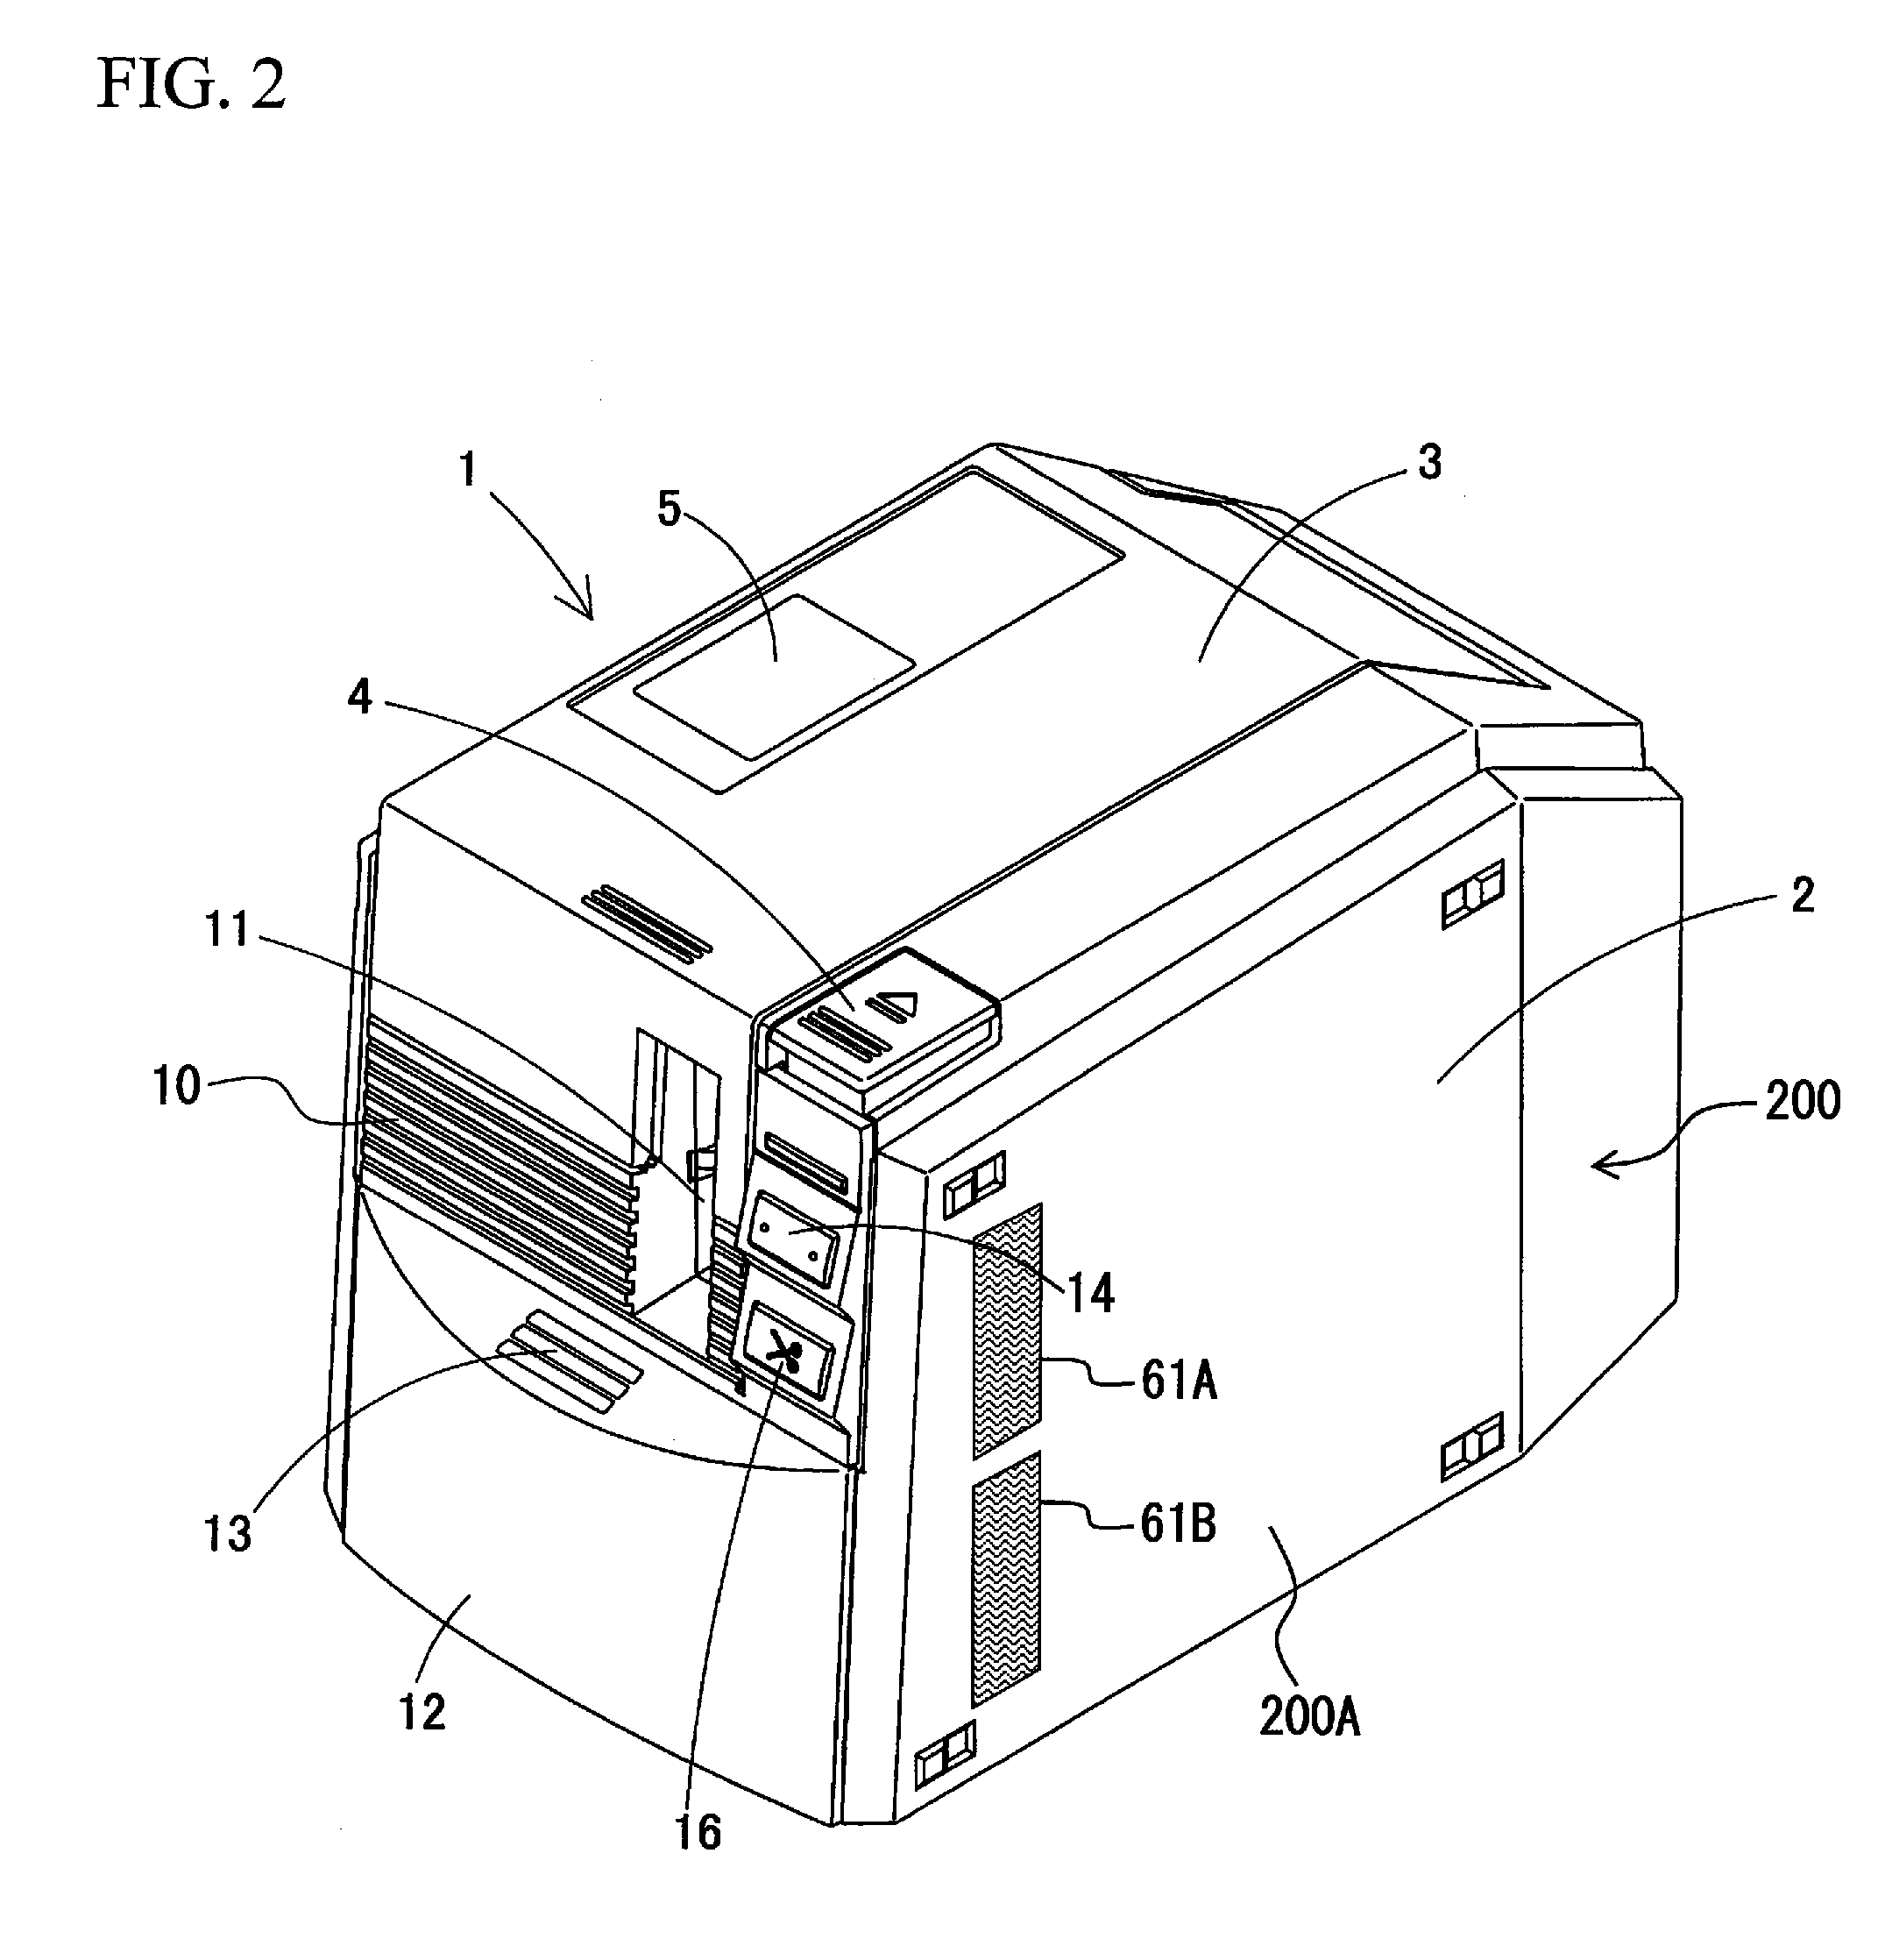 Apparatus for communicating with a RFID tag